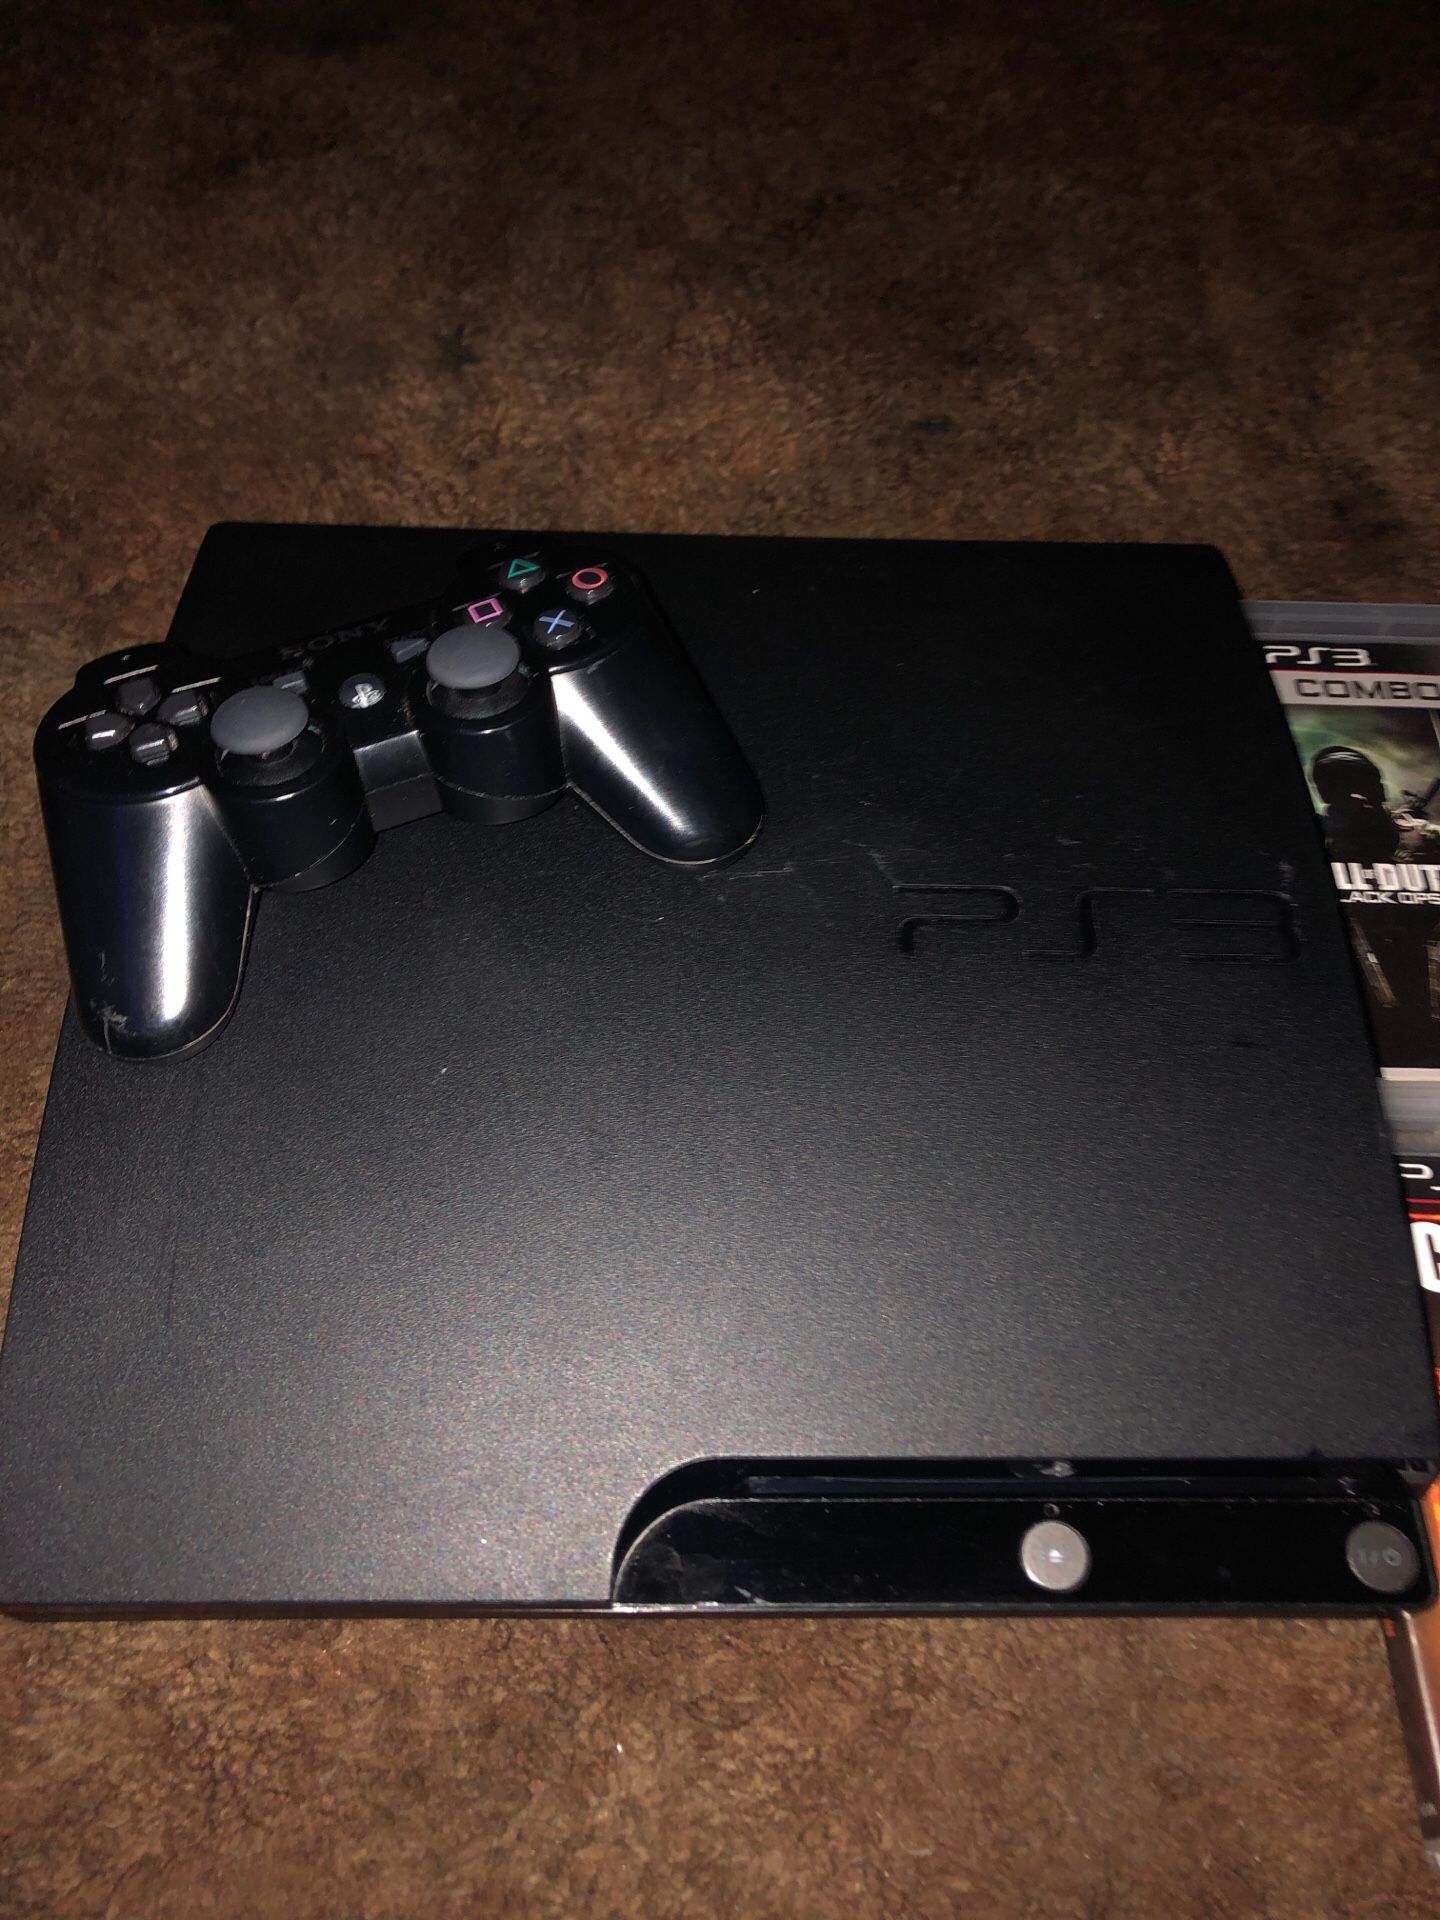 PS3 (controller and 4 games included)